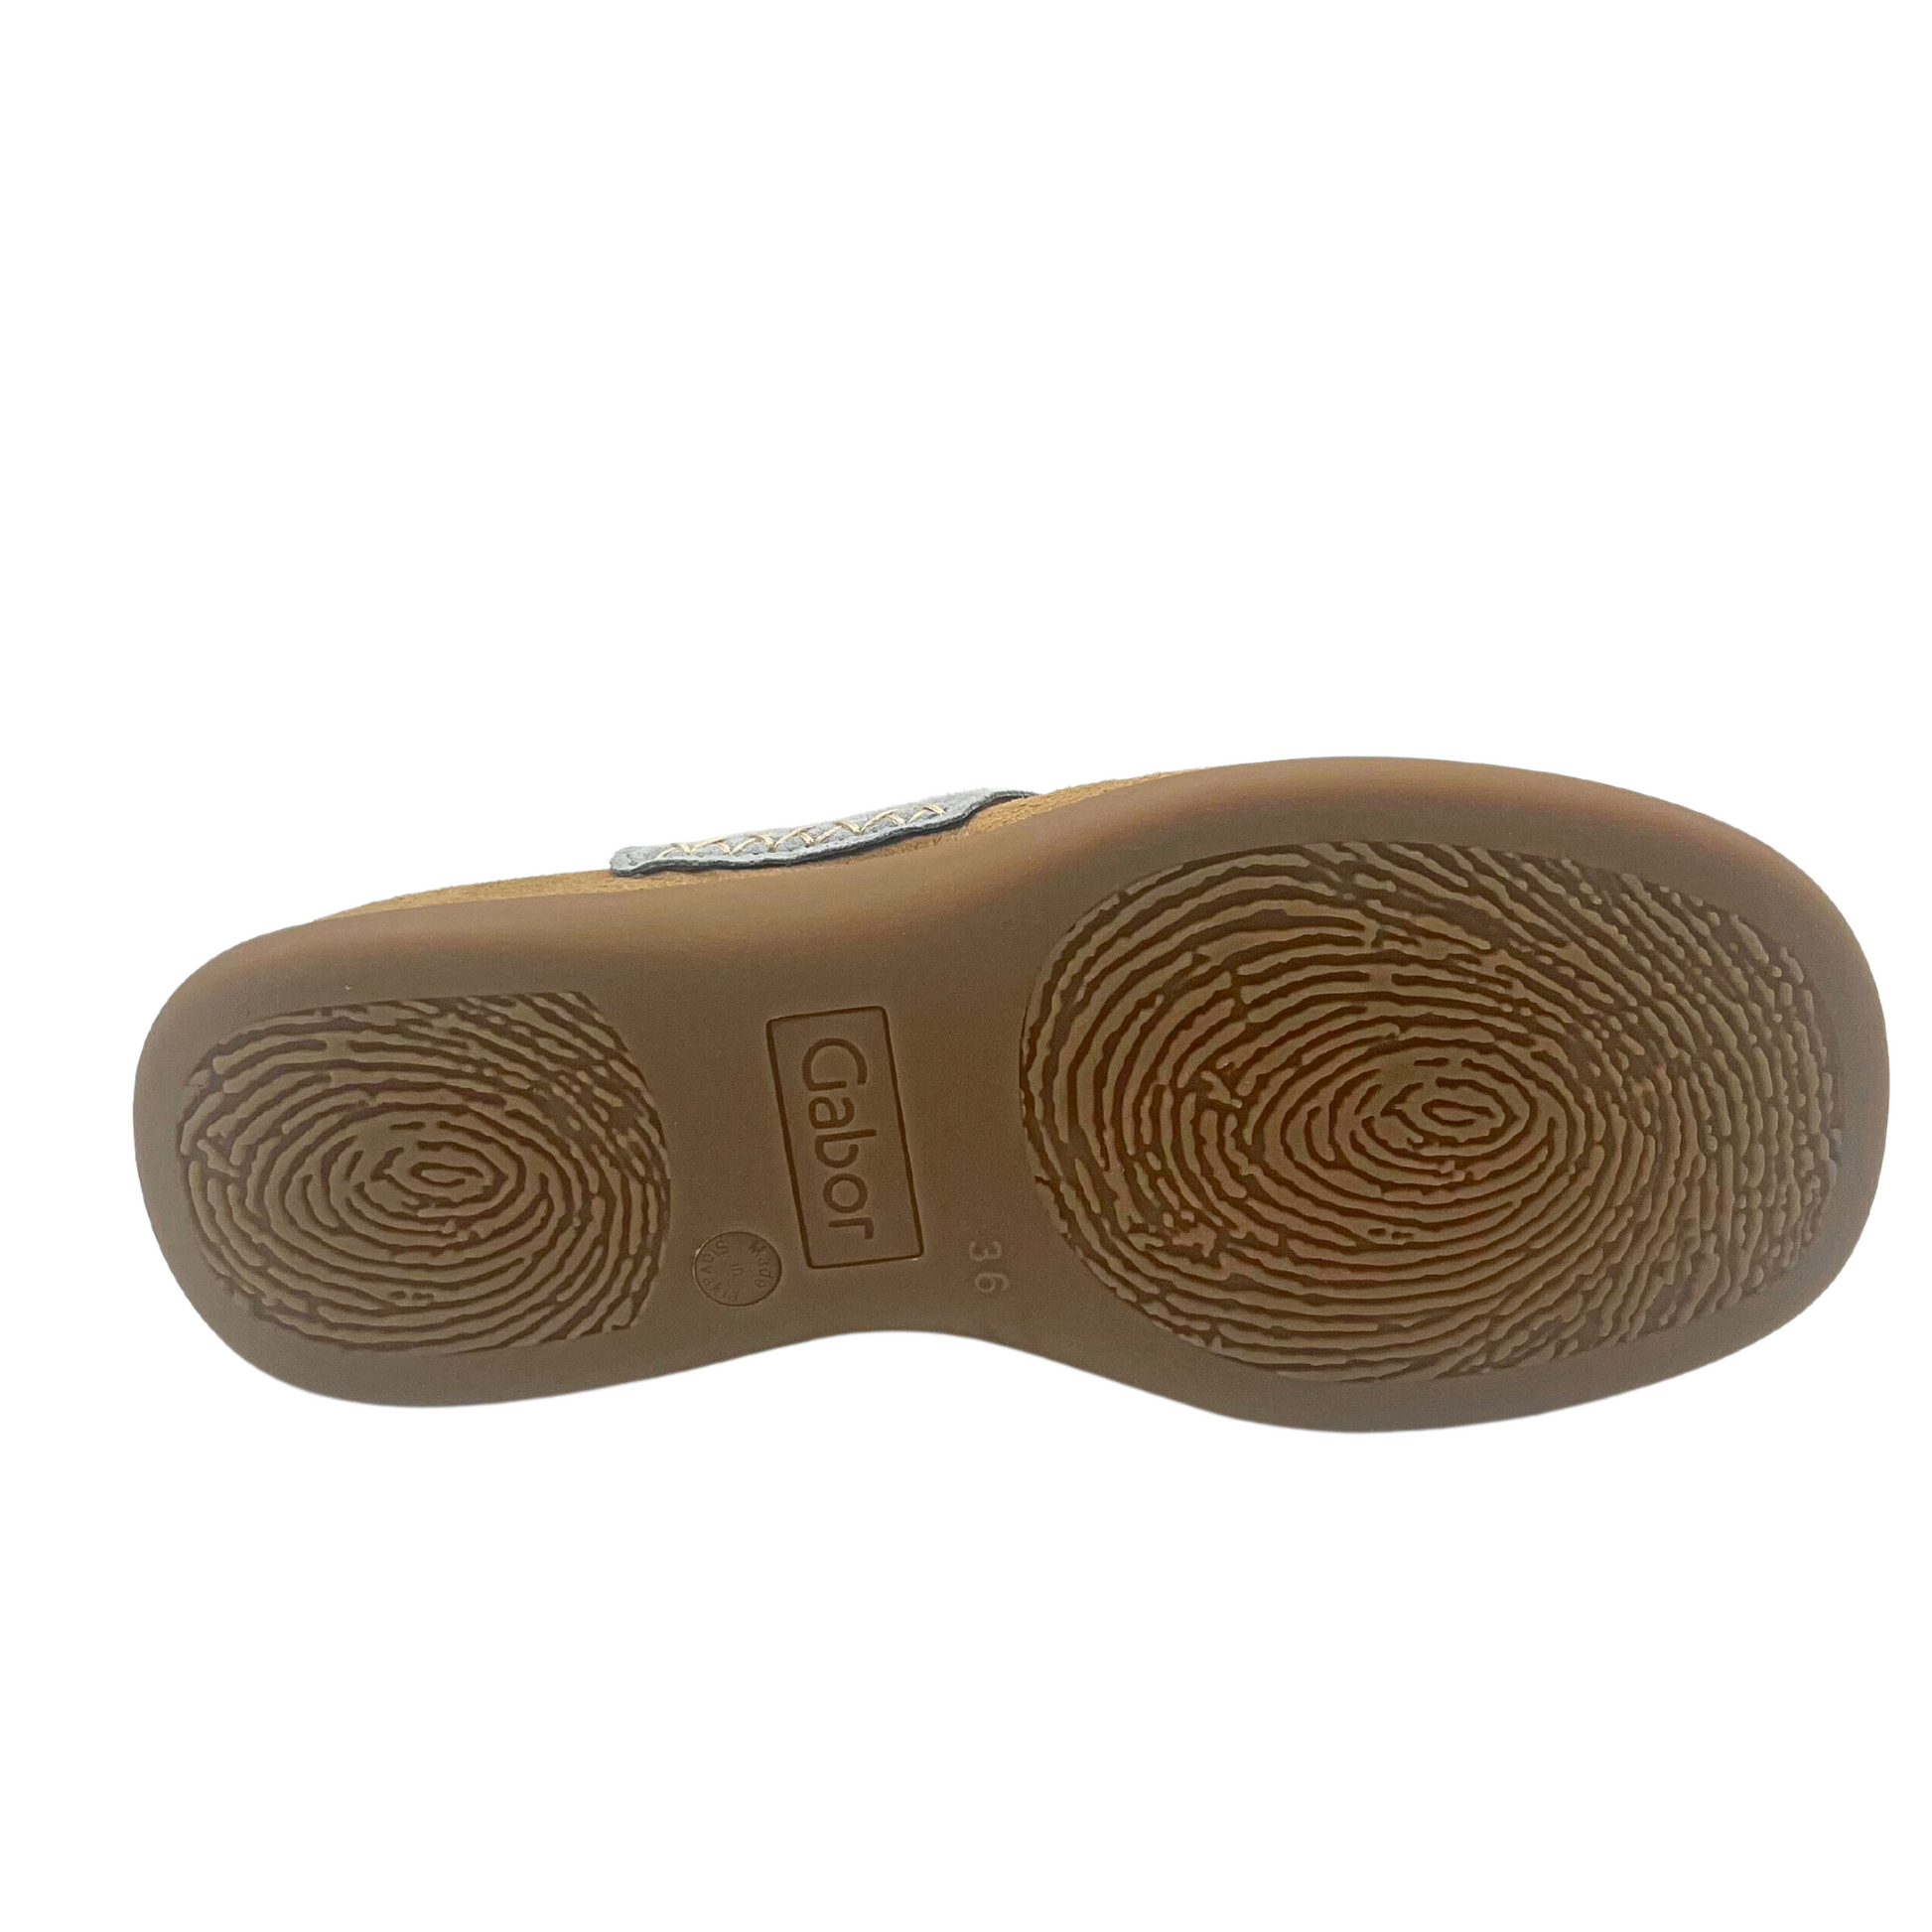 Sole of Gabor Hamburg sandal.  Rubber sole for good traction on all surfaces